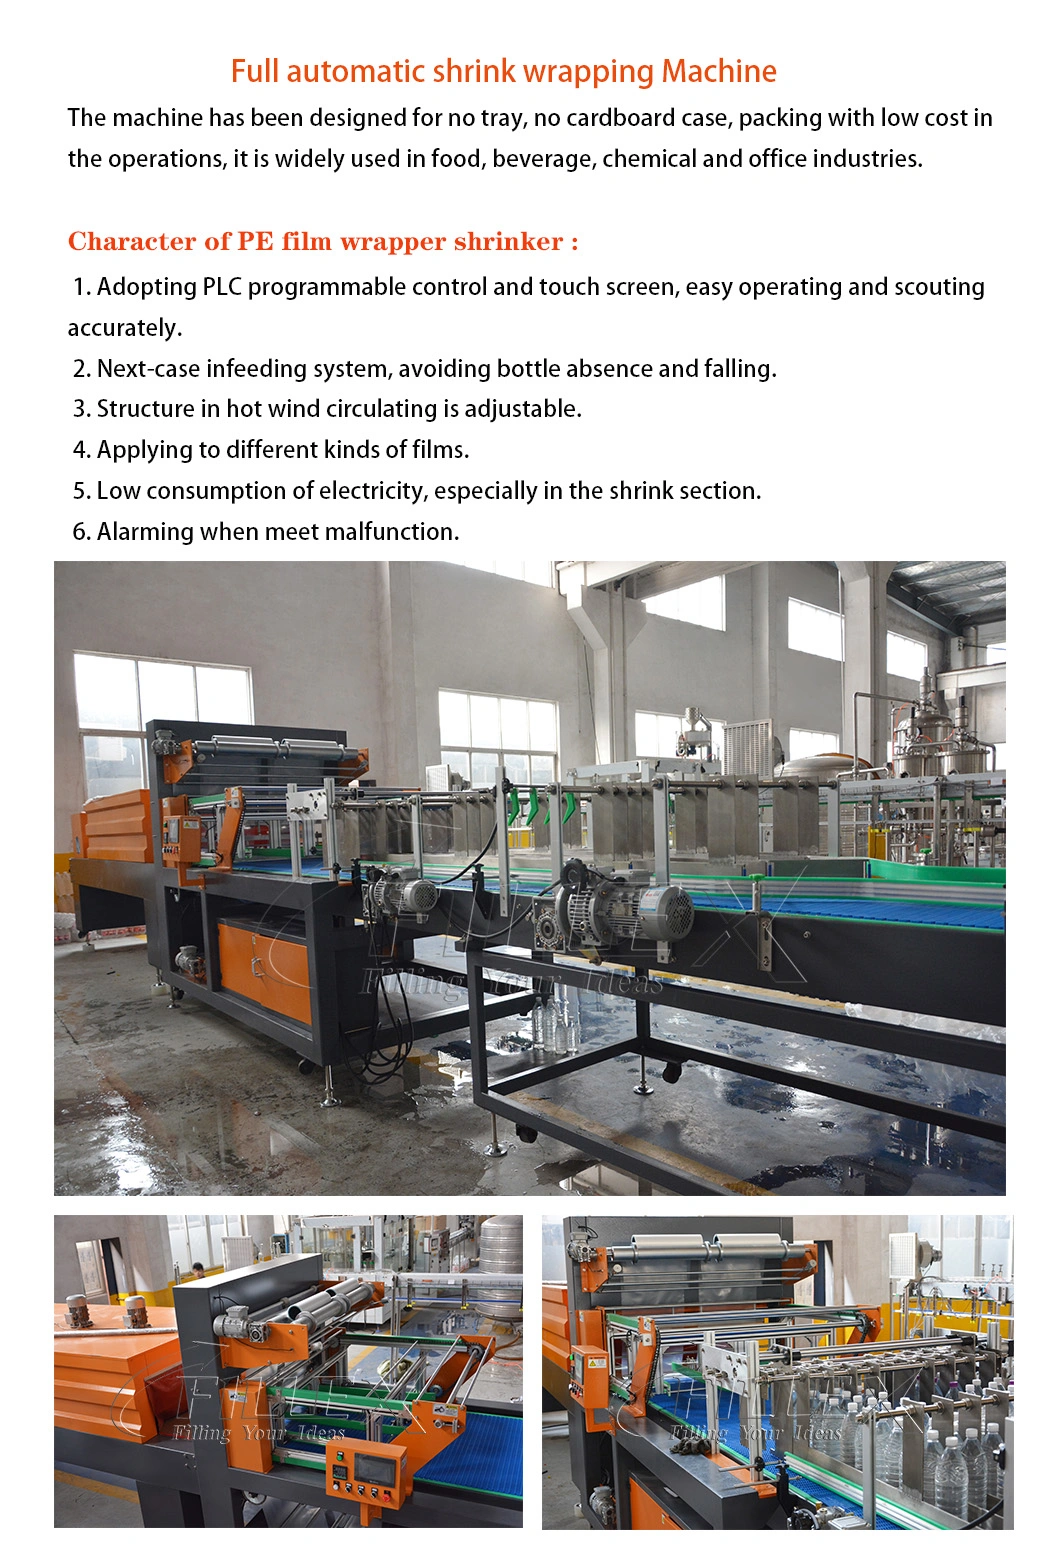 Carbonated Drink Aluminium Can Filling Machine with Stable Quality